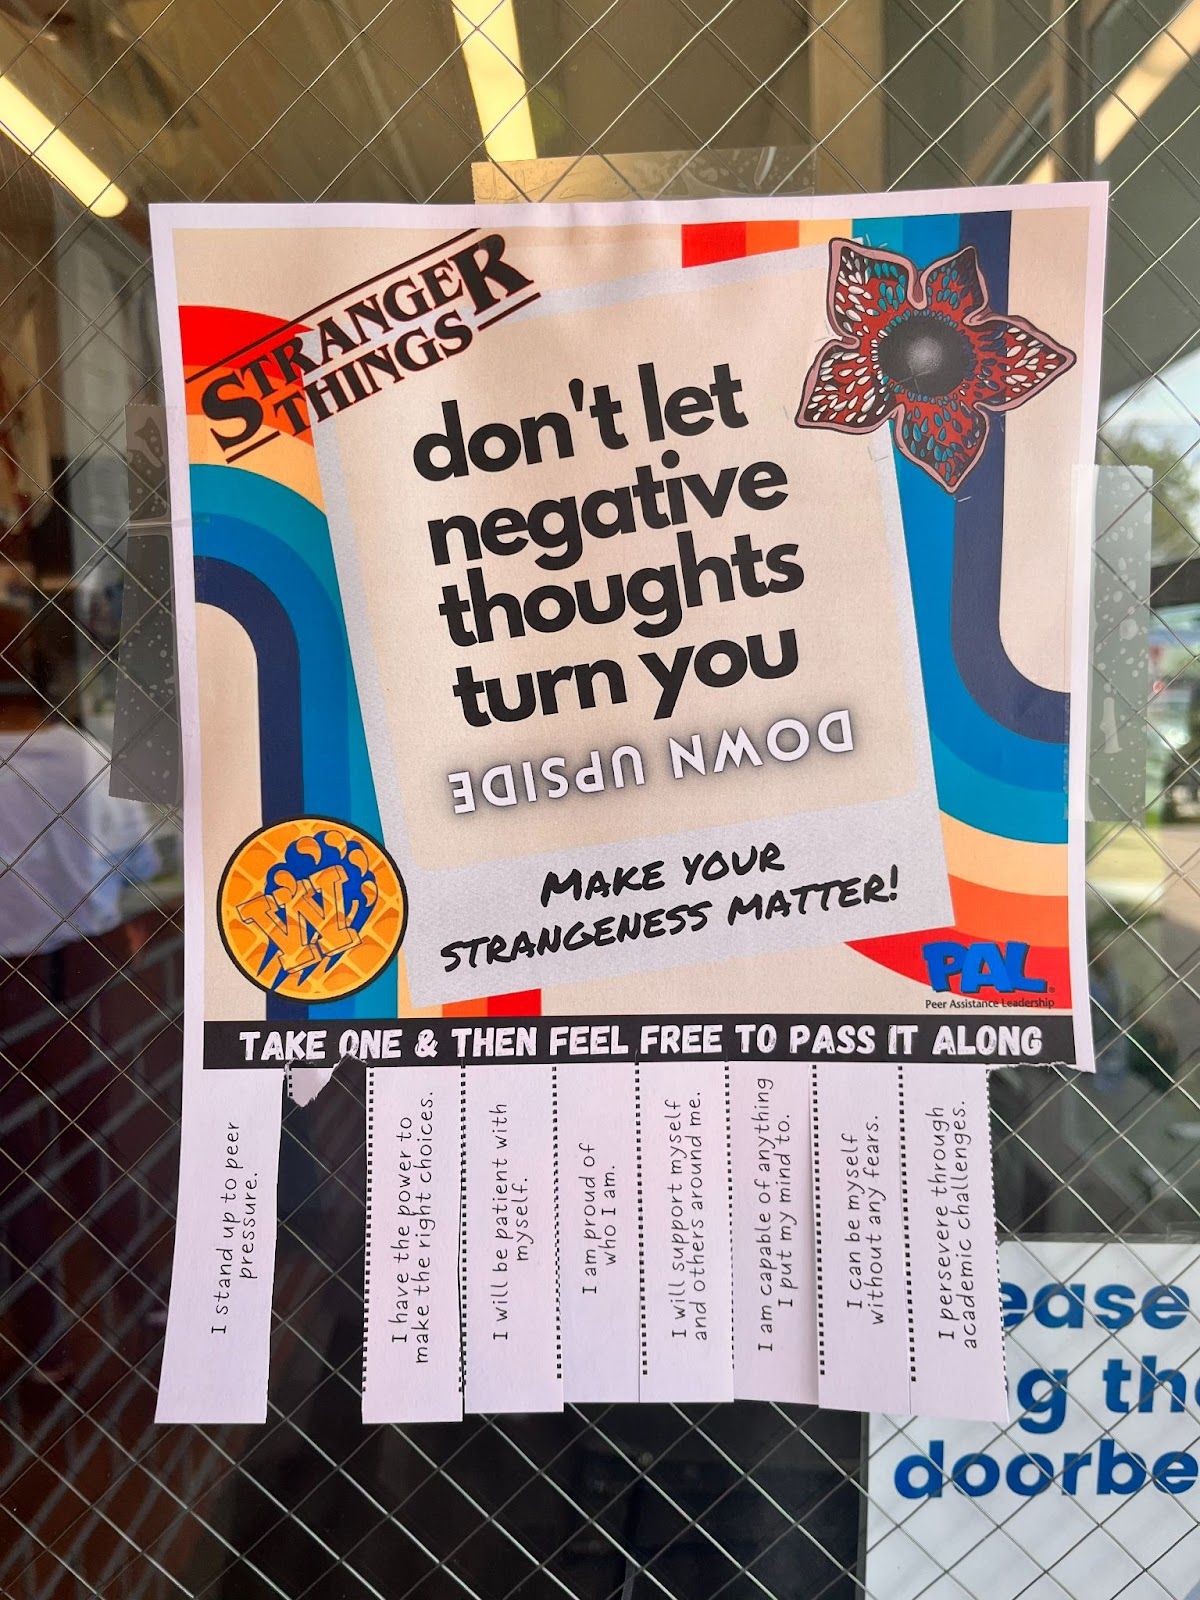 Warner's Kid Conference used creative ways to tap into the 'Stranger Things' theme to focus on promoting positivity and boosting mental health, including this flier on campus. Photo by Jeannette Andruss.